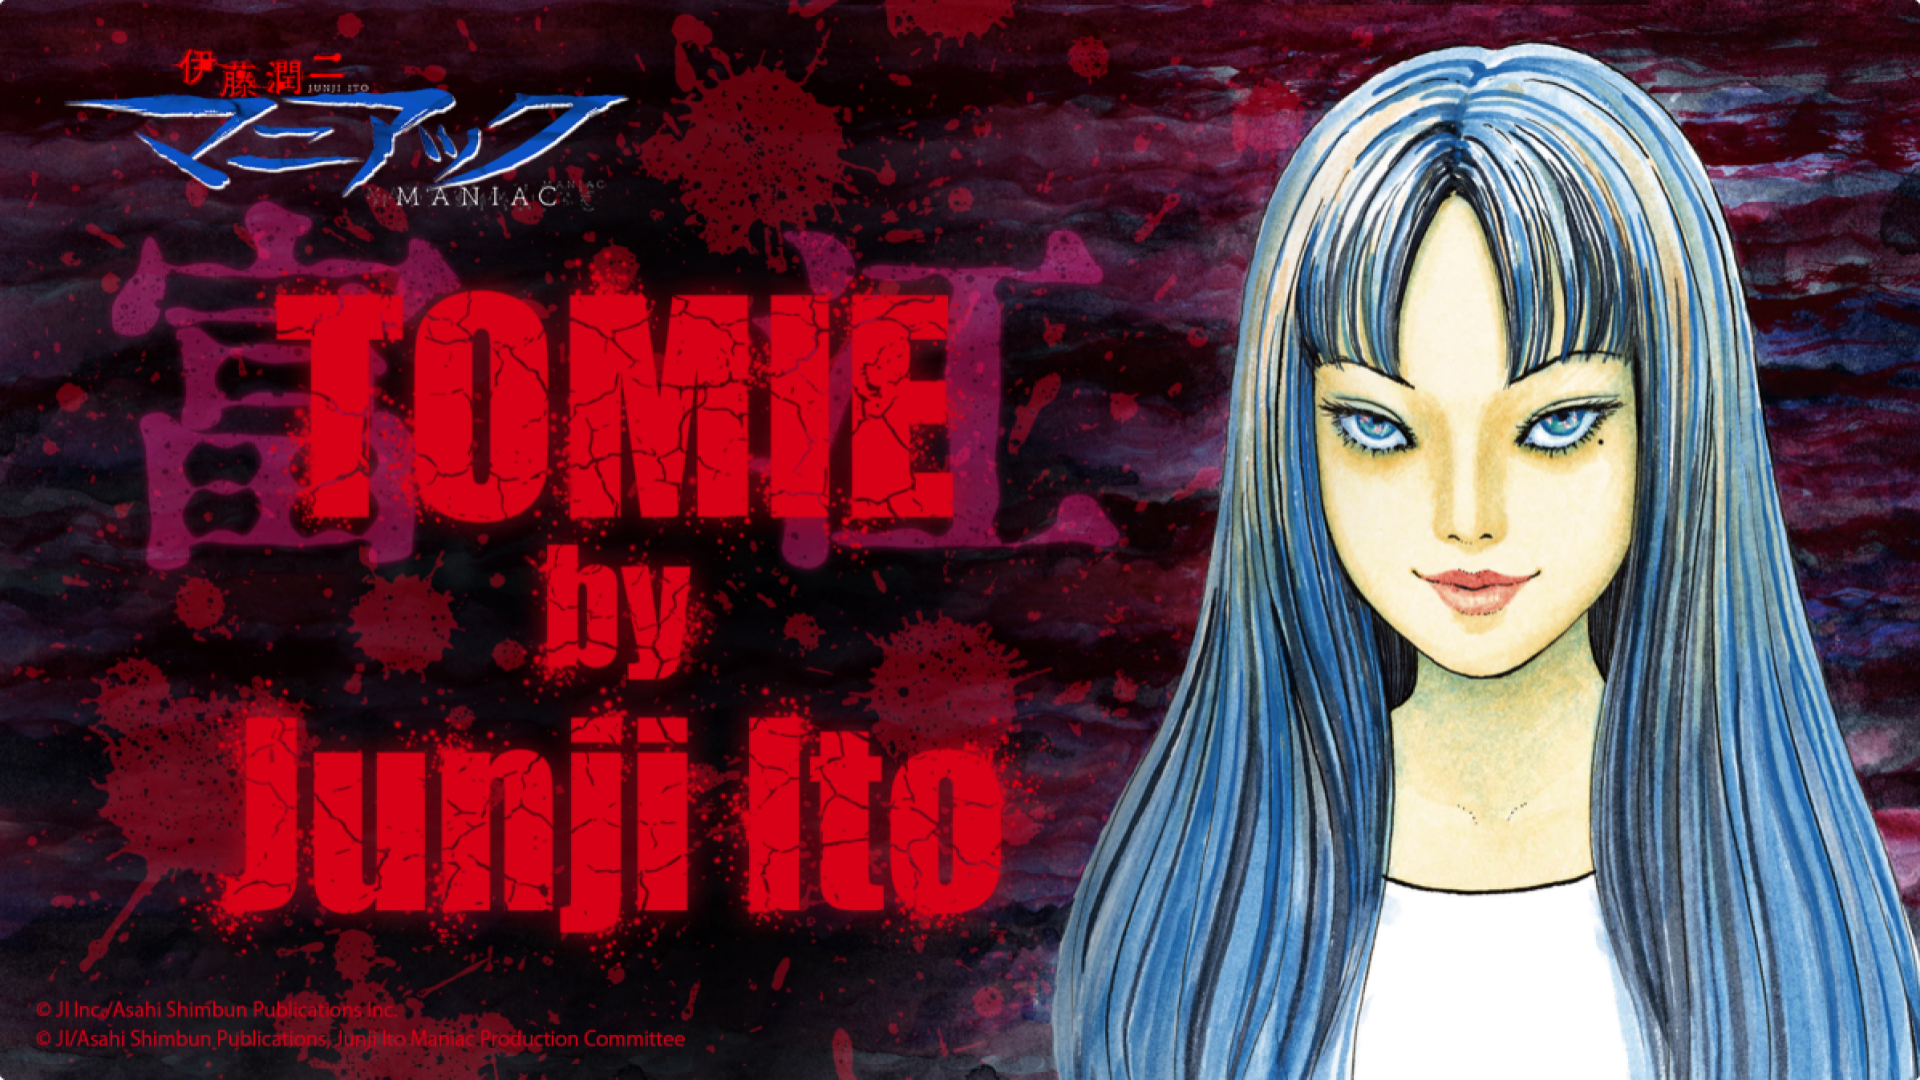 Junji Ito Maniac Anime Teaser Offers a Peek at Tomie - Siliconera